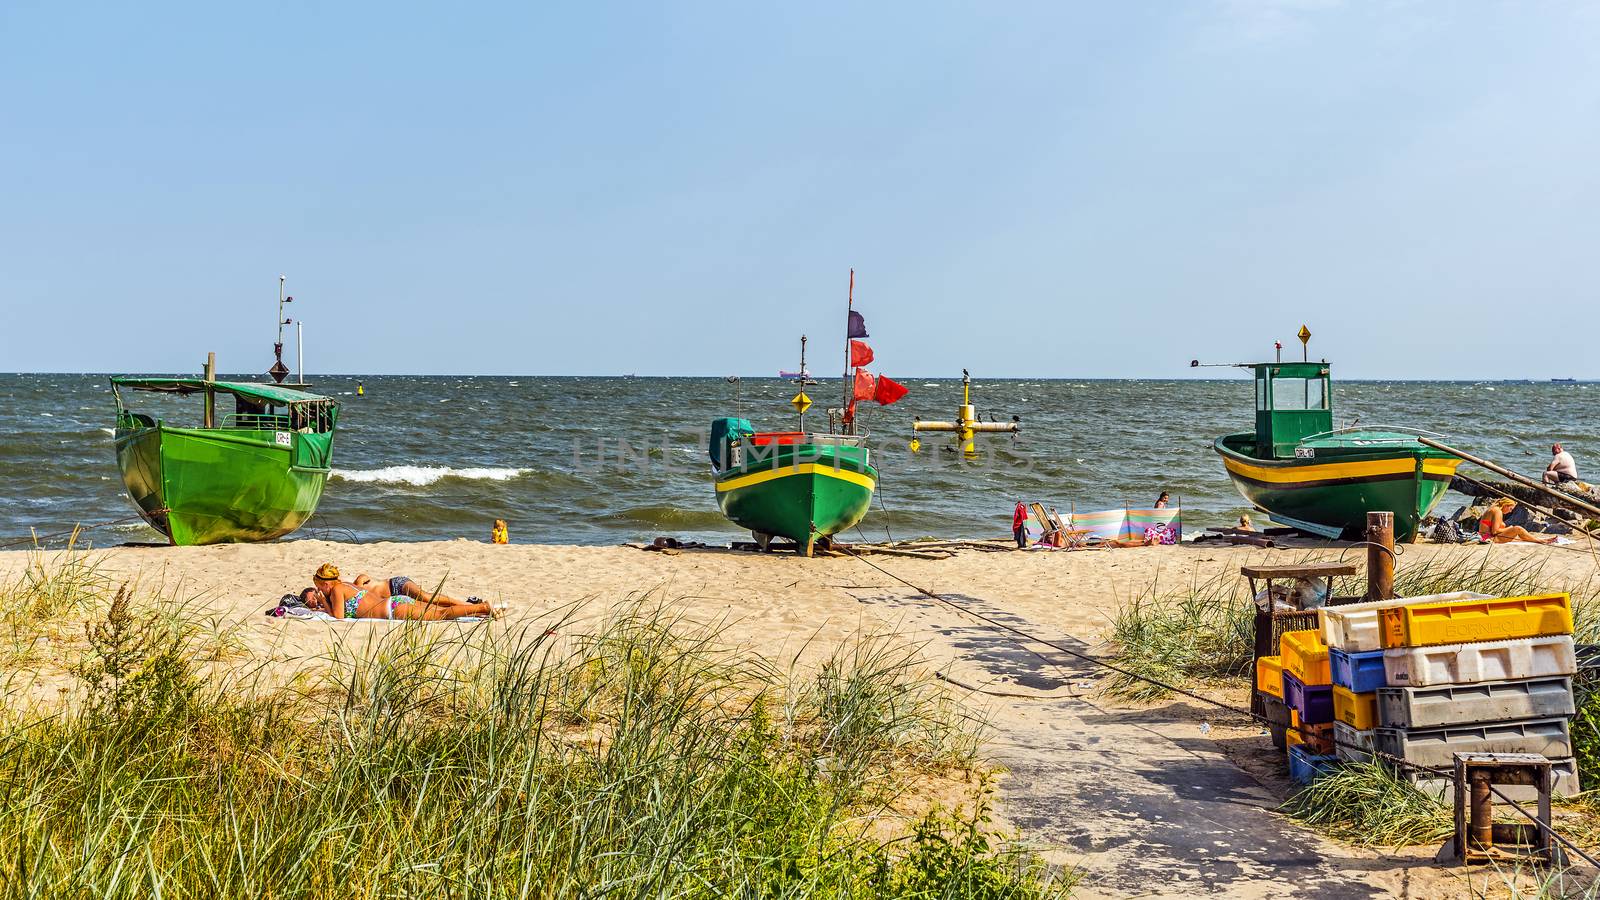 People sunbath on a beach in Orlowo, district of Gdynia, former fishermen village founded in 1826. Main attractions are maritime cliffs and the pier at 180m long.